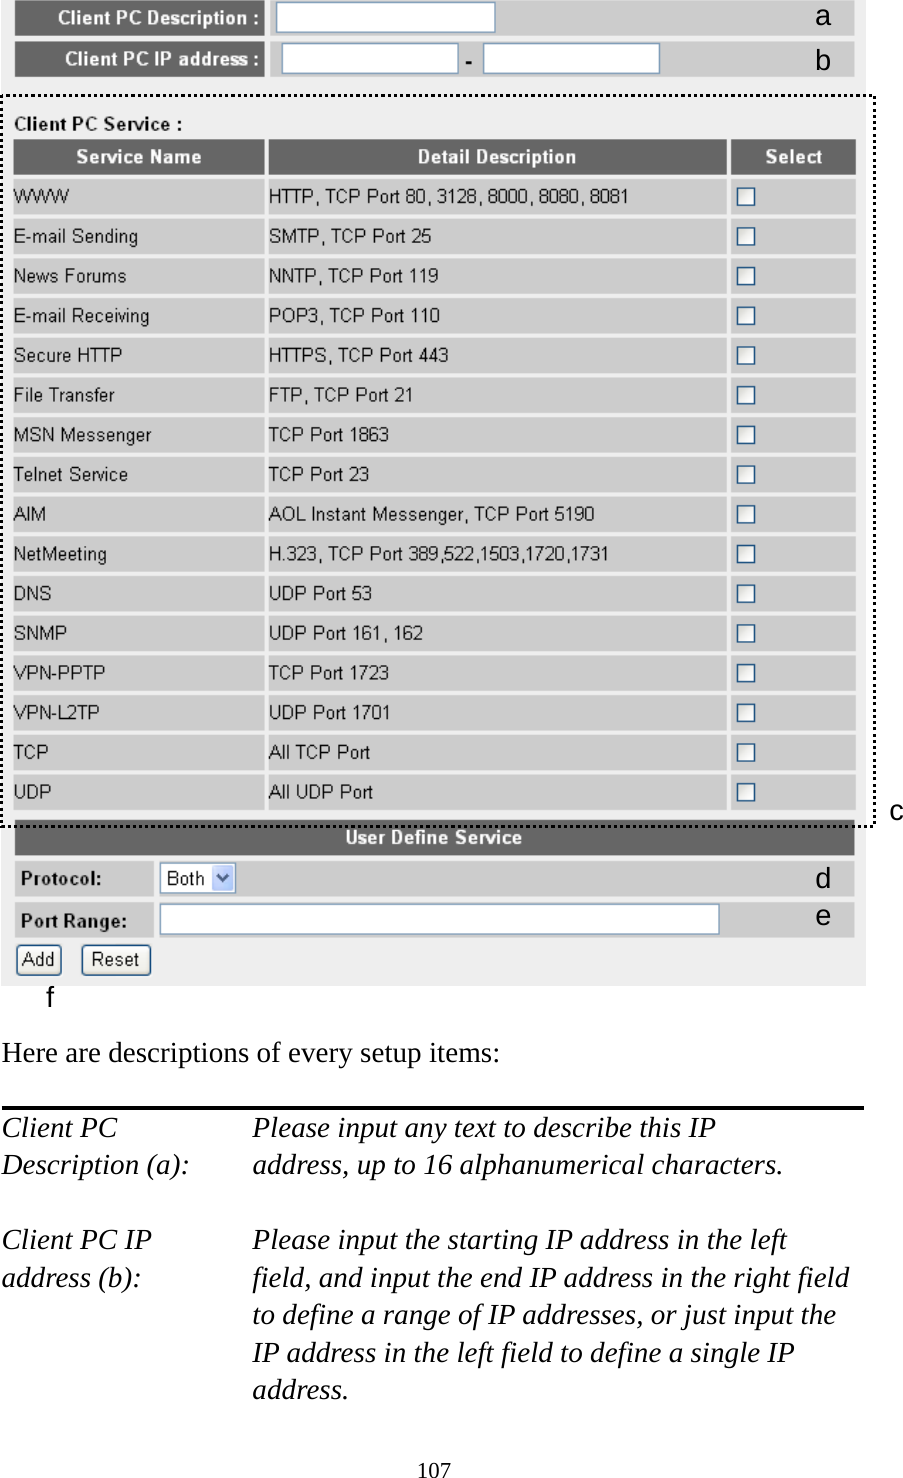 107   Here are descriptions of every setup items:  Client PC        Please input any text to describe this IP Description (a):    address, up to 16 alphanumerical characters.  Client PC IP      Please input the starting IP address in the left address (b):    field, and input the end IP address in the right field to define a range of IP addresses, or just input the IP address in the left field to define a single IP address. a b c d e f 